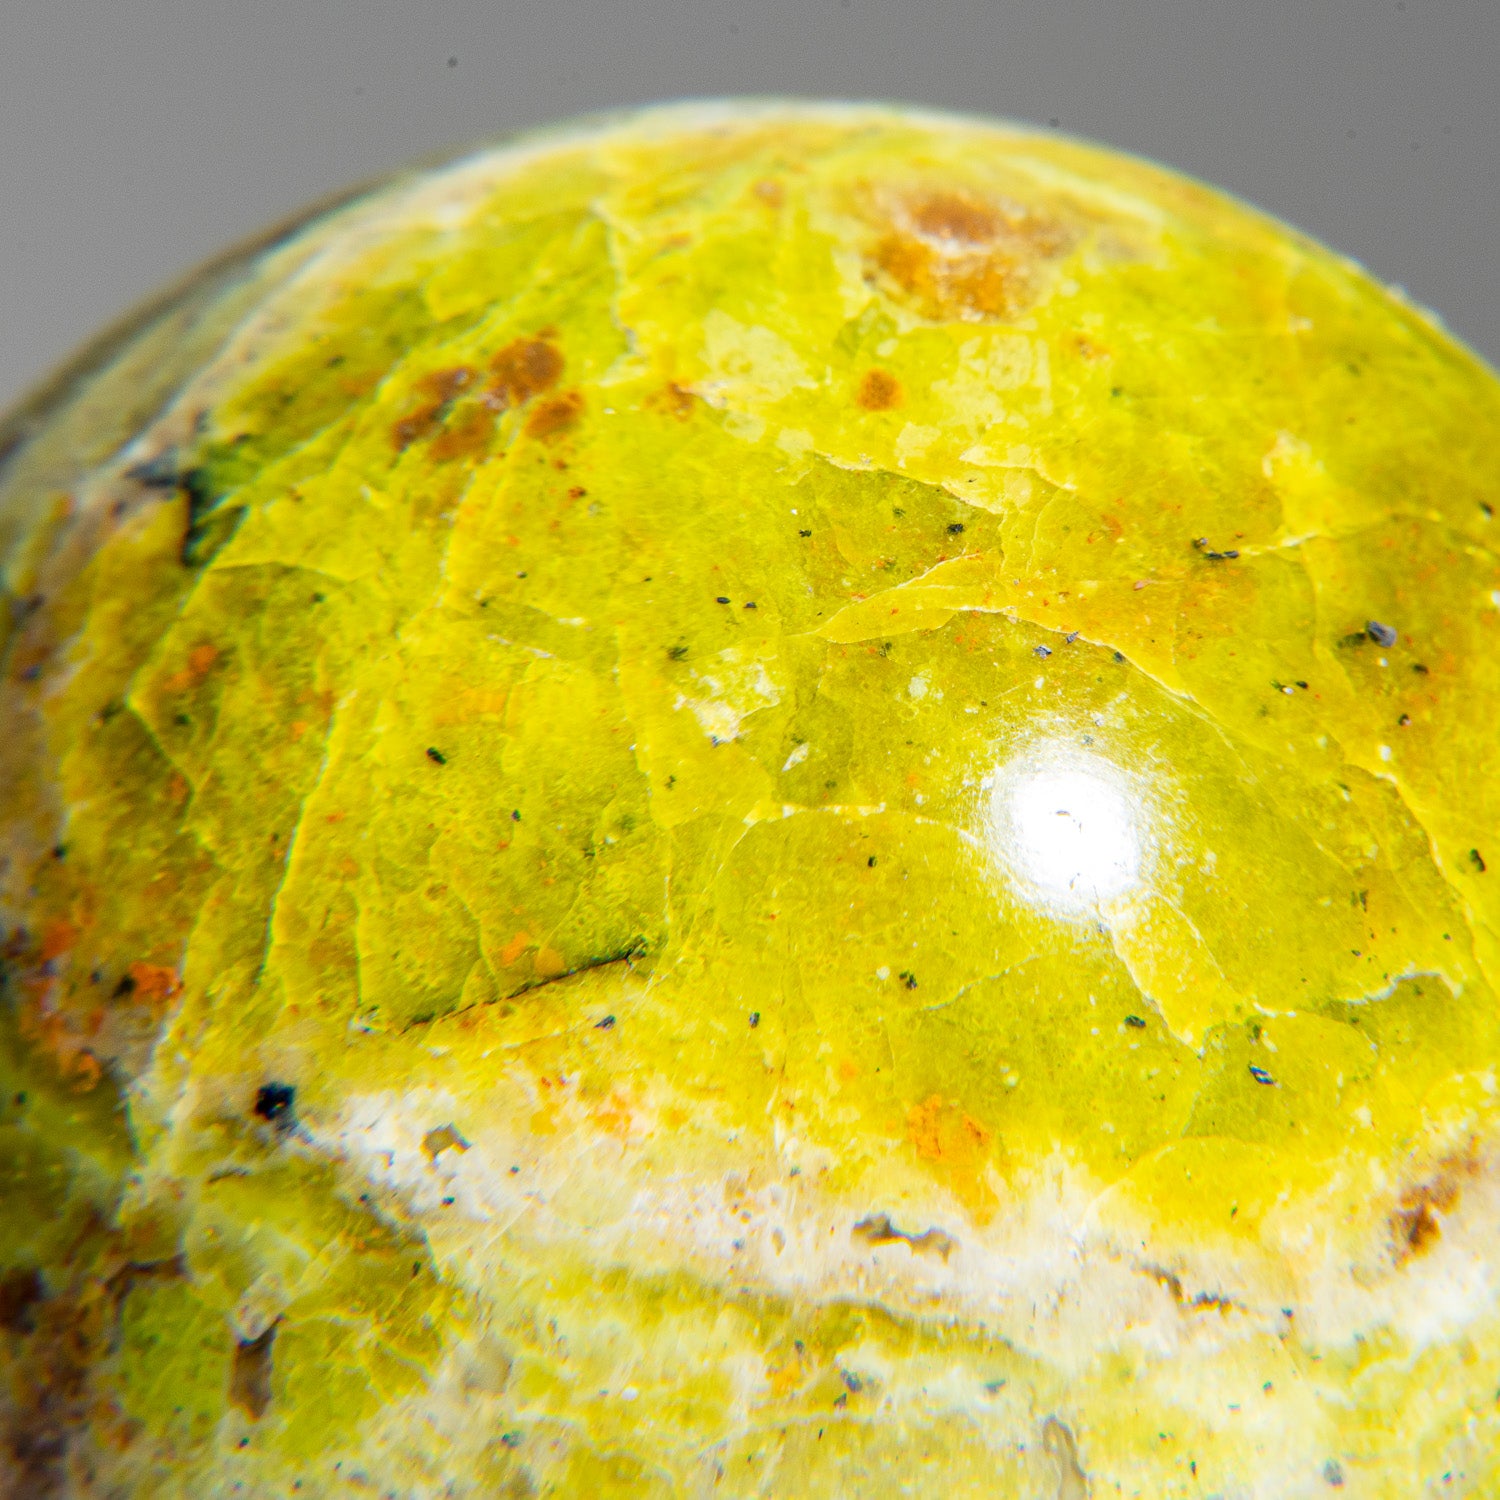 Polished Green Opal Sphere from Madagascar (650 grams)